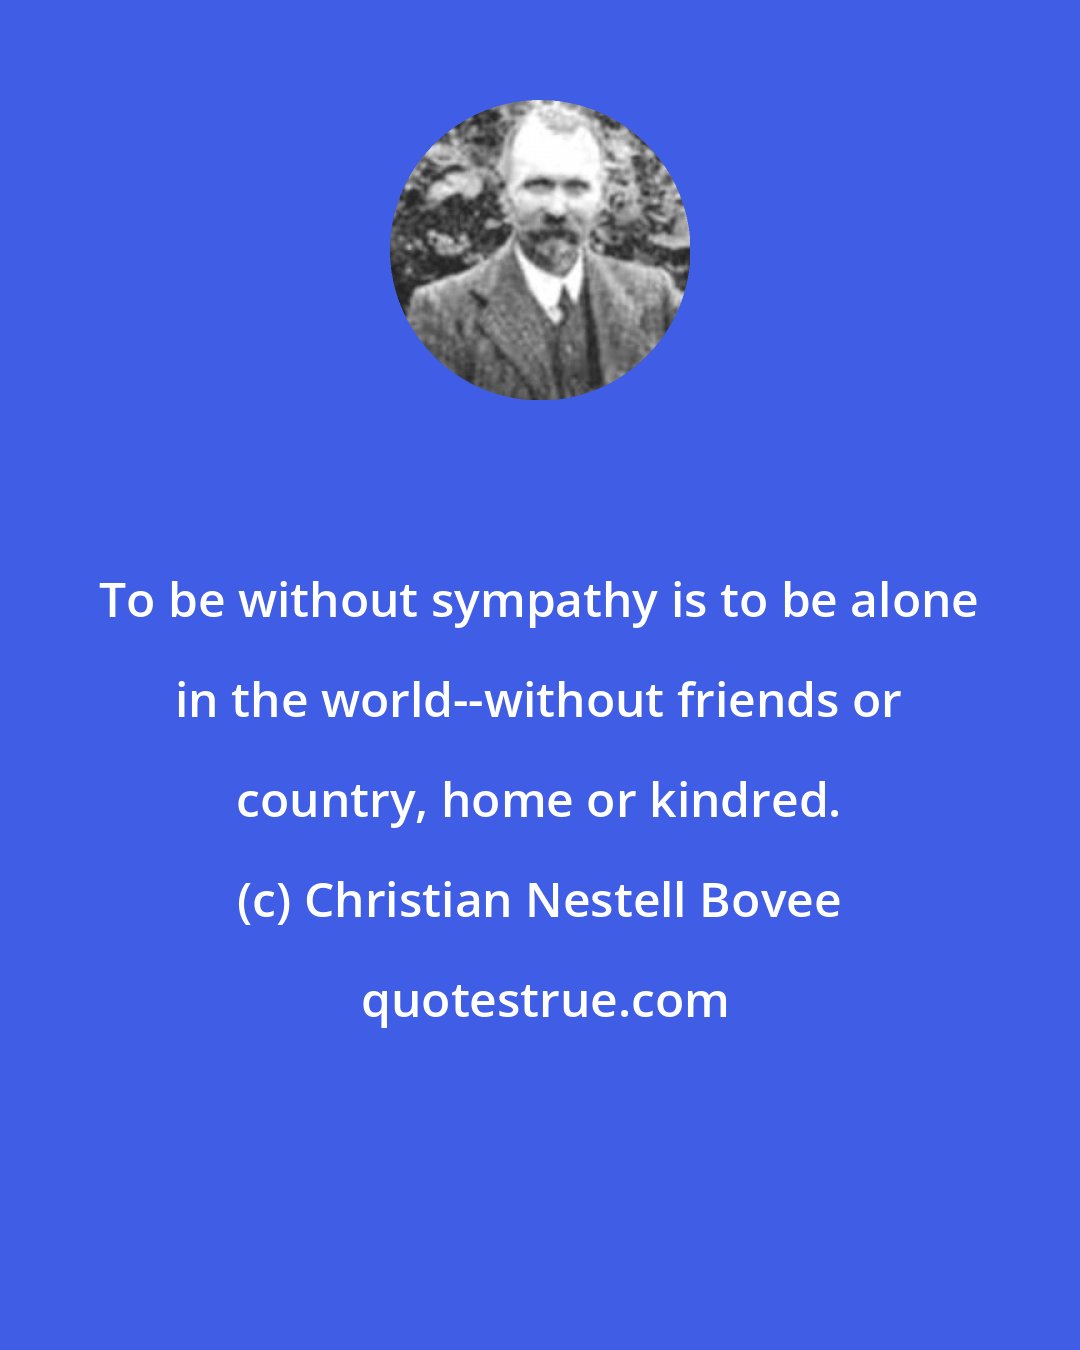 Christian Nestell Bovee: To be without sympathy is to be alone in the world--without friends or country, home or kindred.